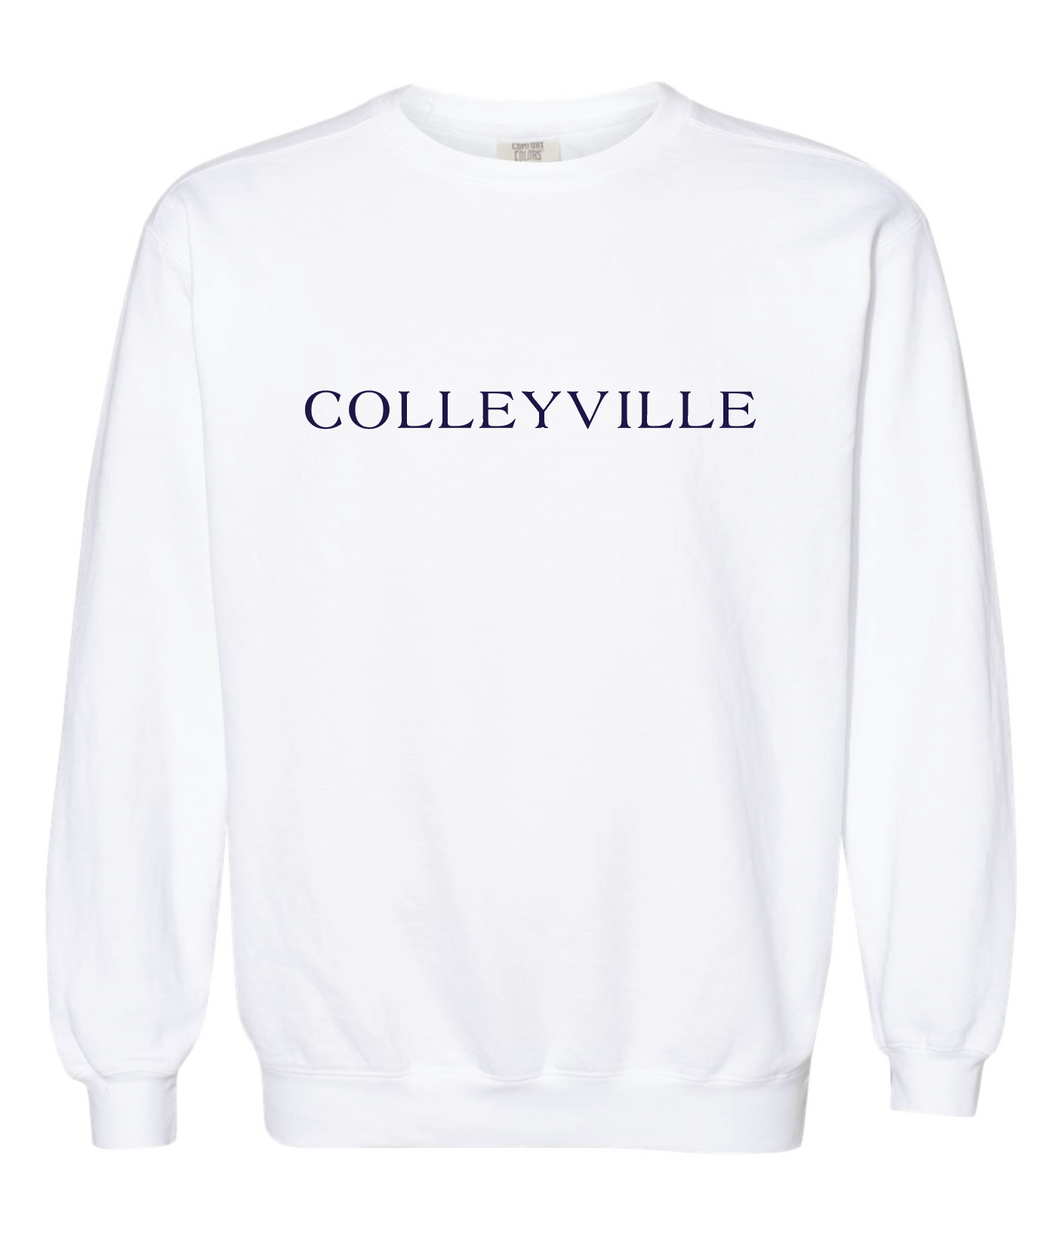 Colleyside Crew Sweatshirt by Comfort Colors in White